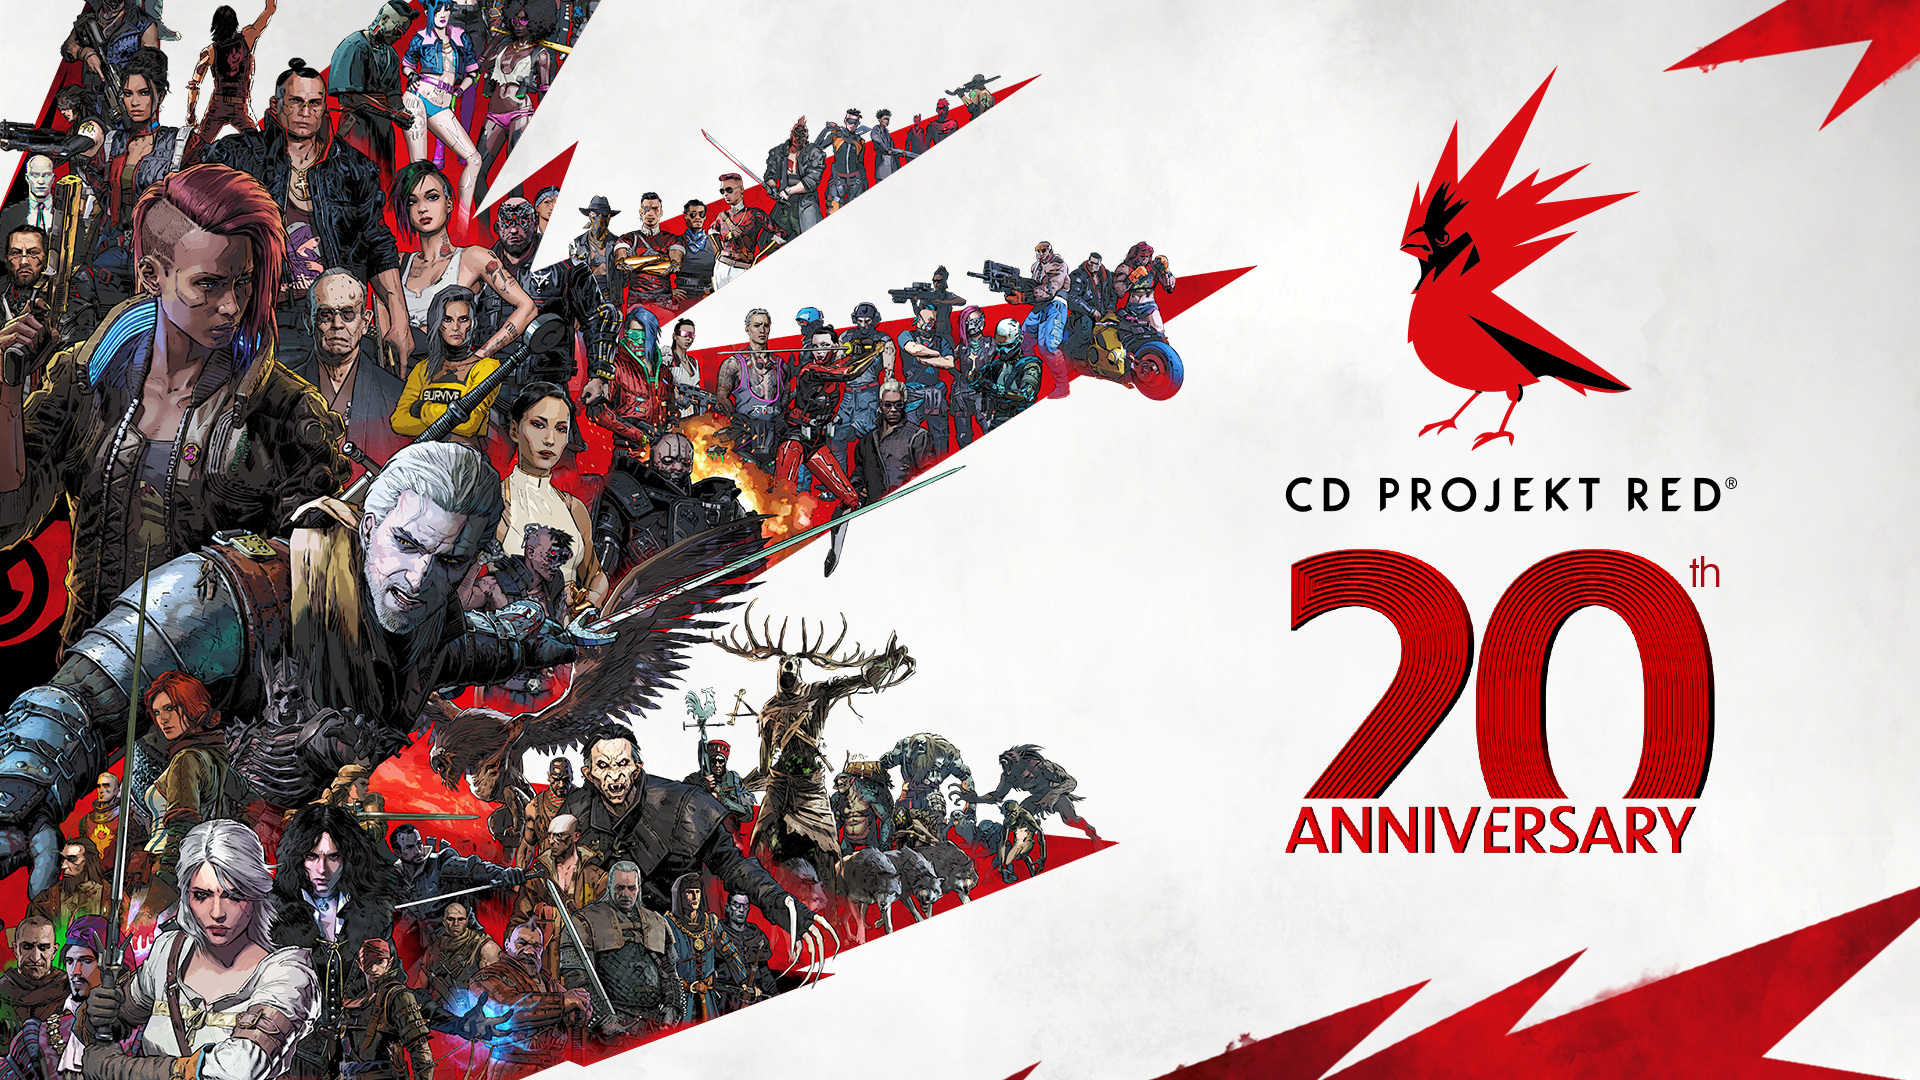 CD PROJEKT RED levels up its game development process with